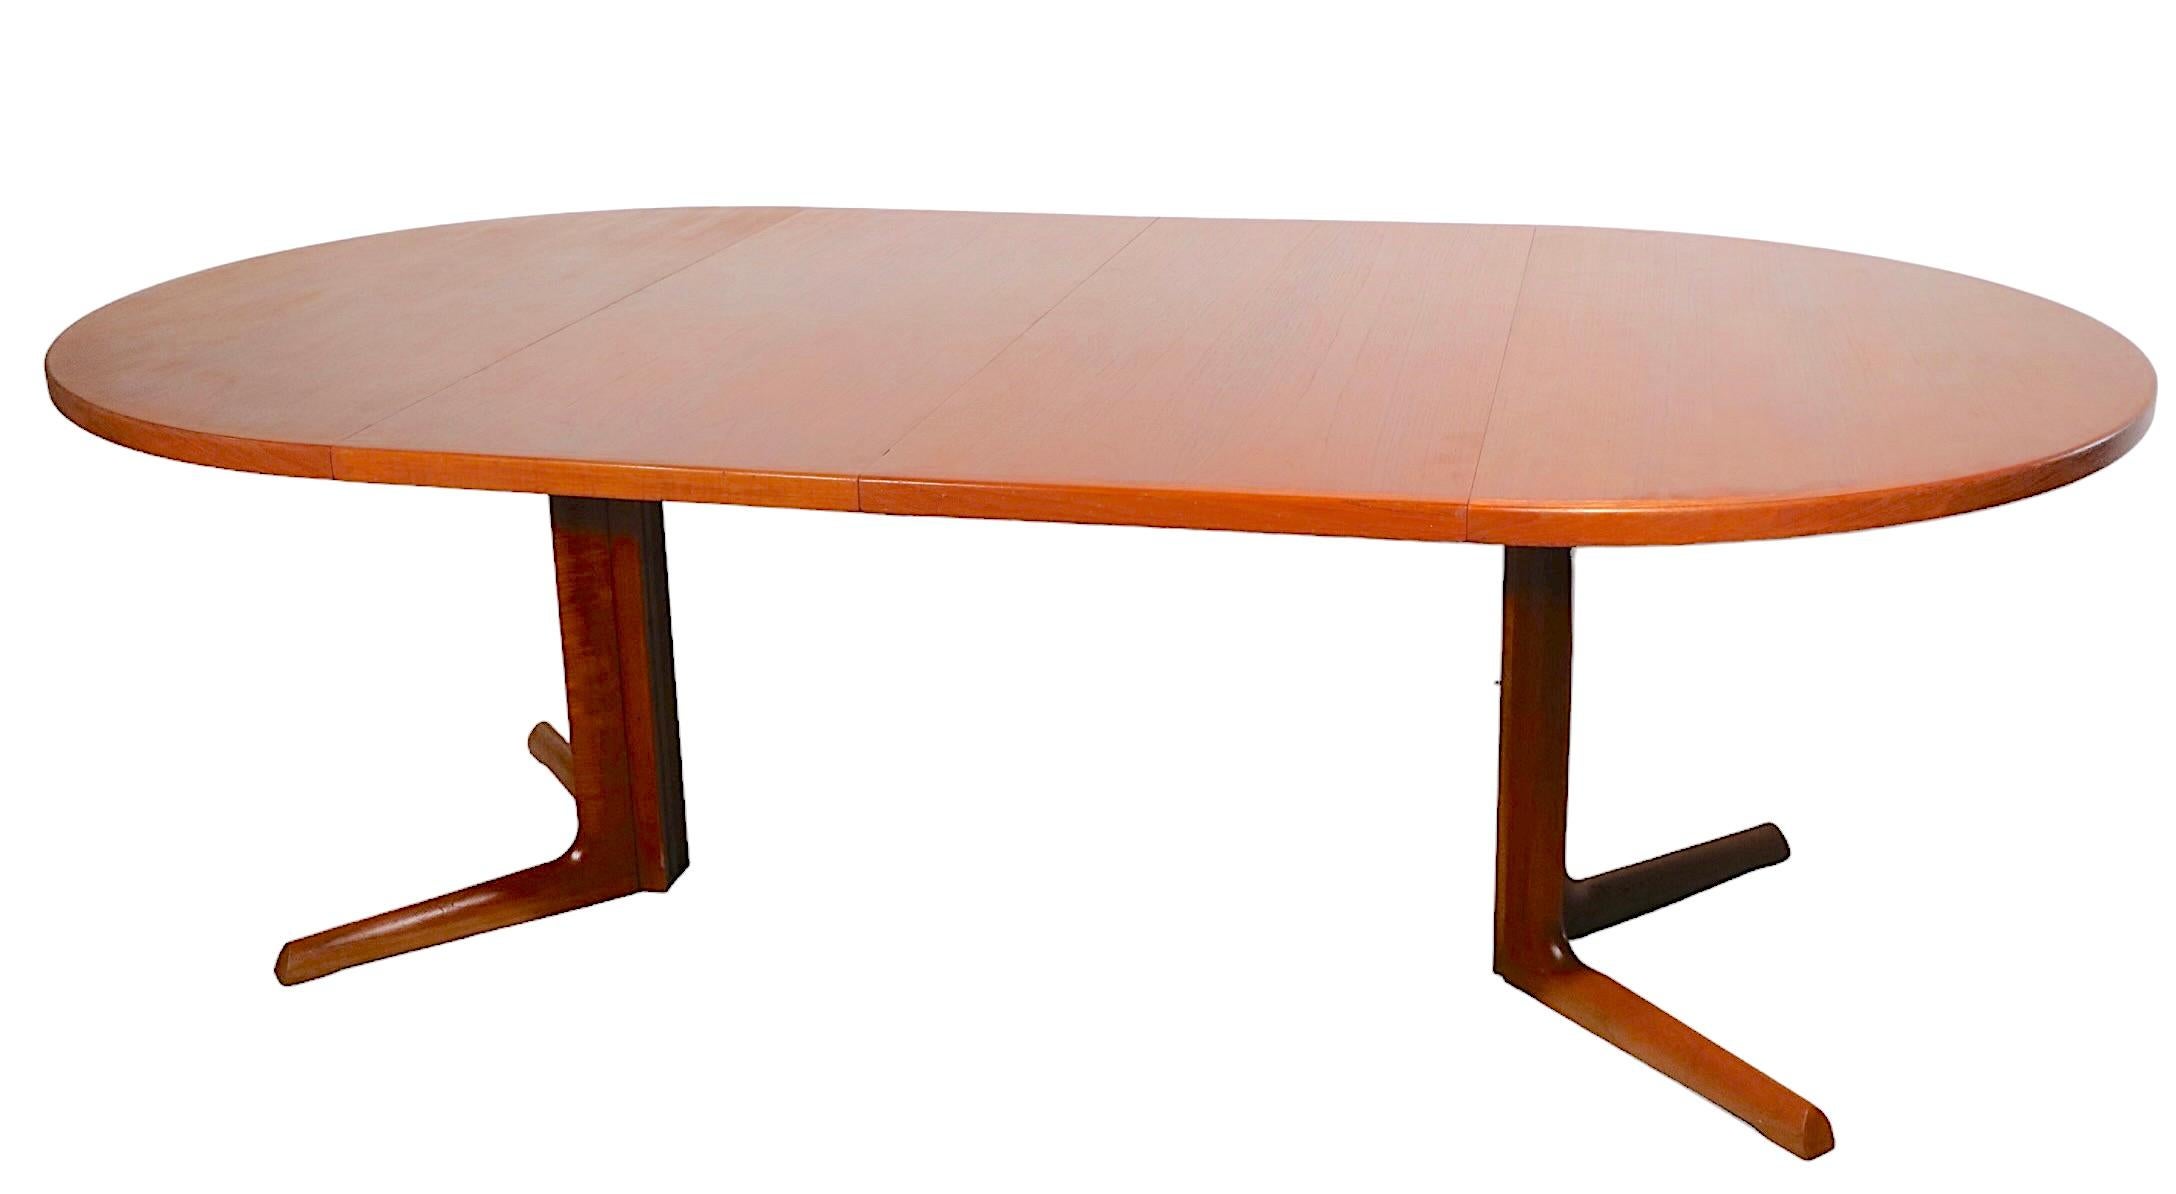 Classic Danish Mid-Century Modern dining table by Gudme Mobelfabrik, with two large leaves. The table features a split pedestal, which opens to accept the leaves, each leaf is 19 1/8 in W. Constructed of teak, this example is structurally sound and